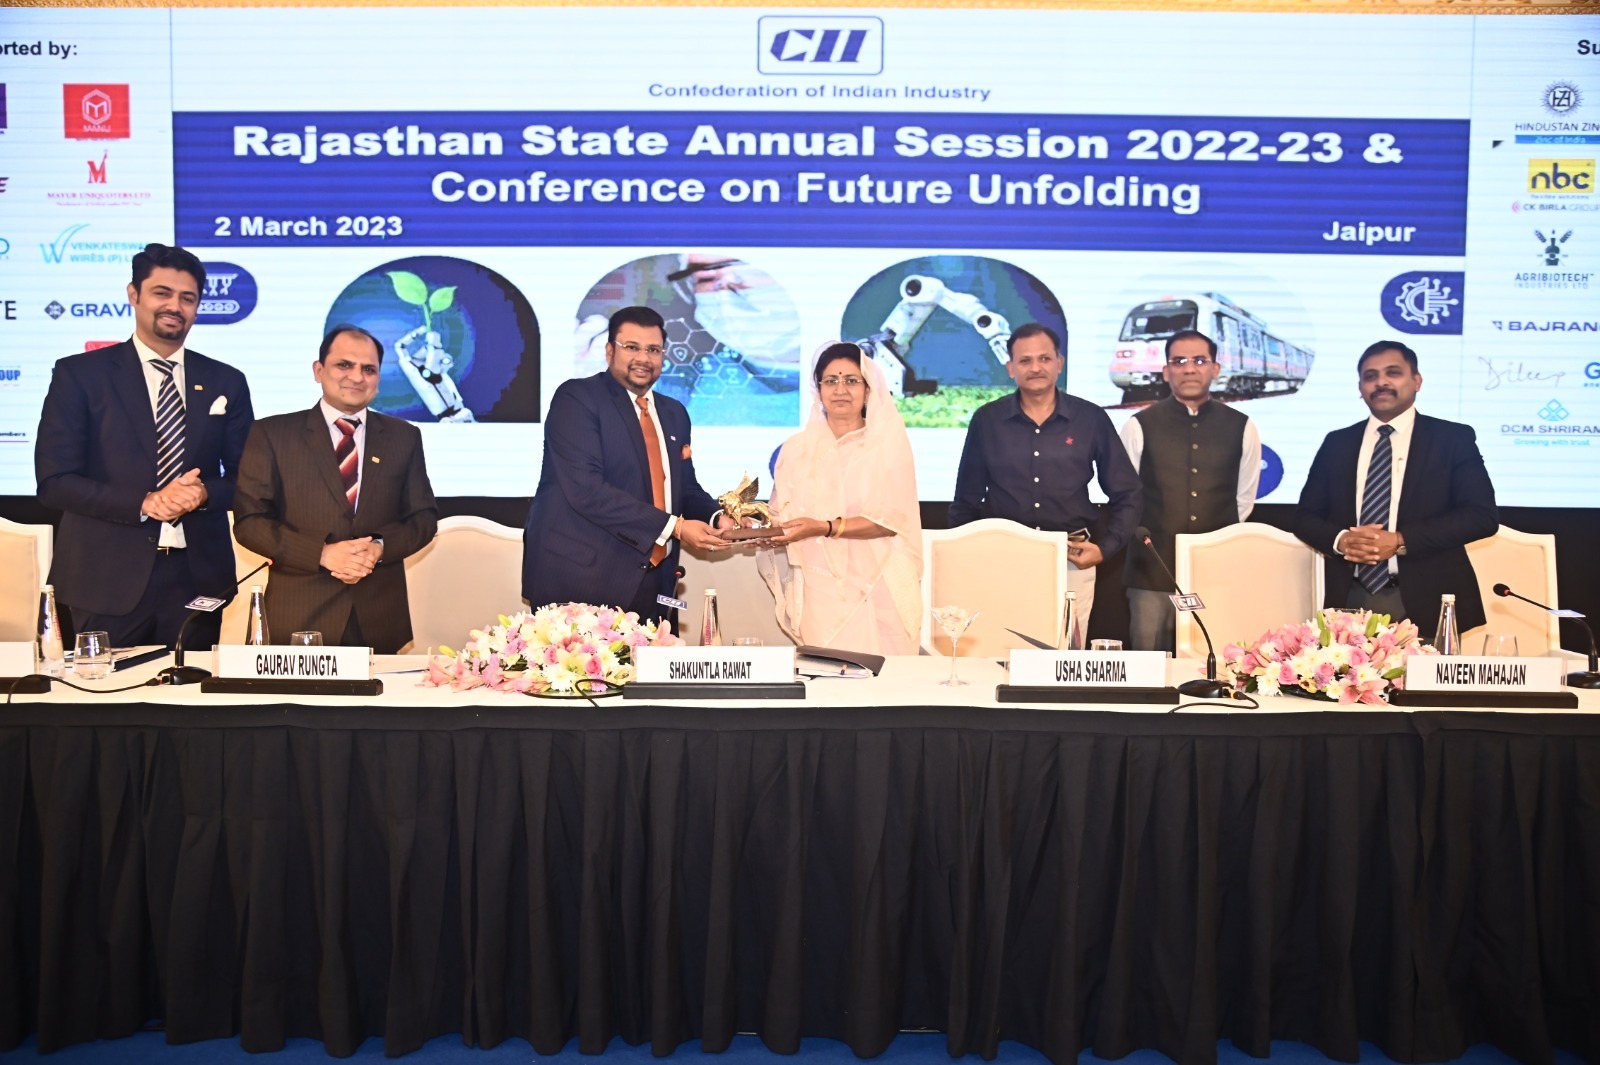 cii-rajasthan-annual-session-and-conference-on-future-unfolding